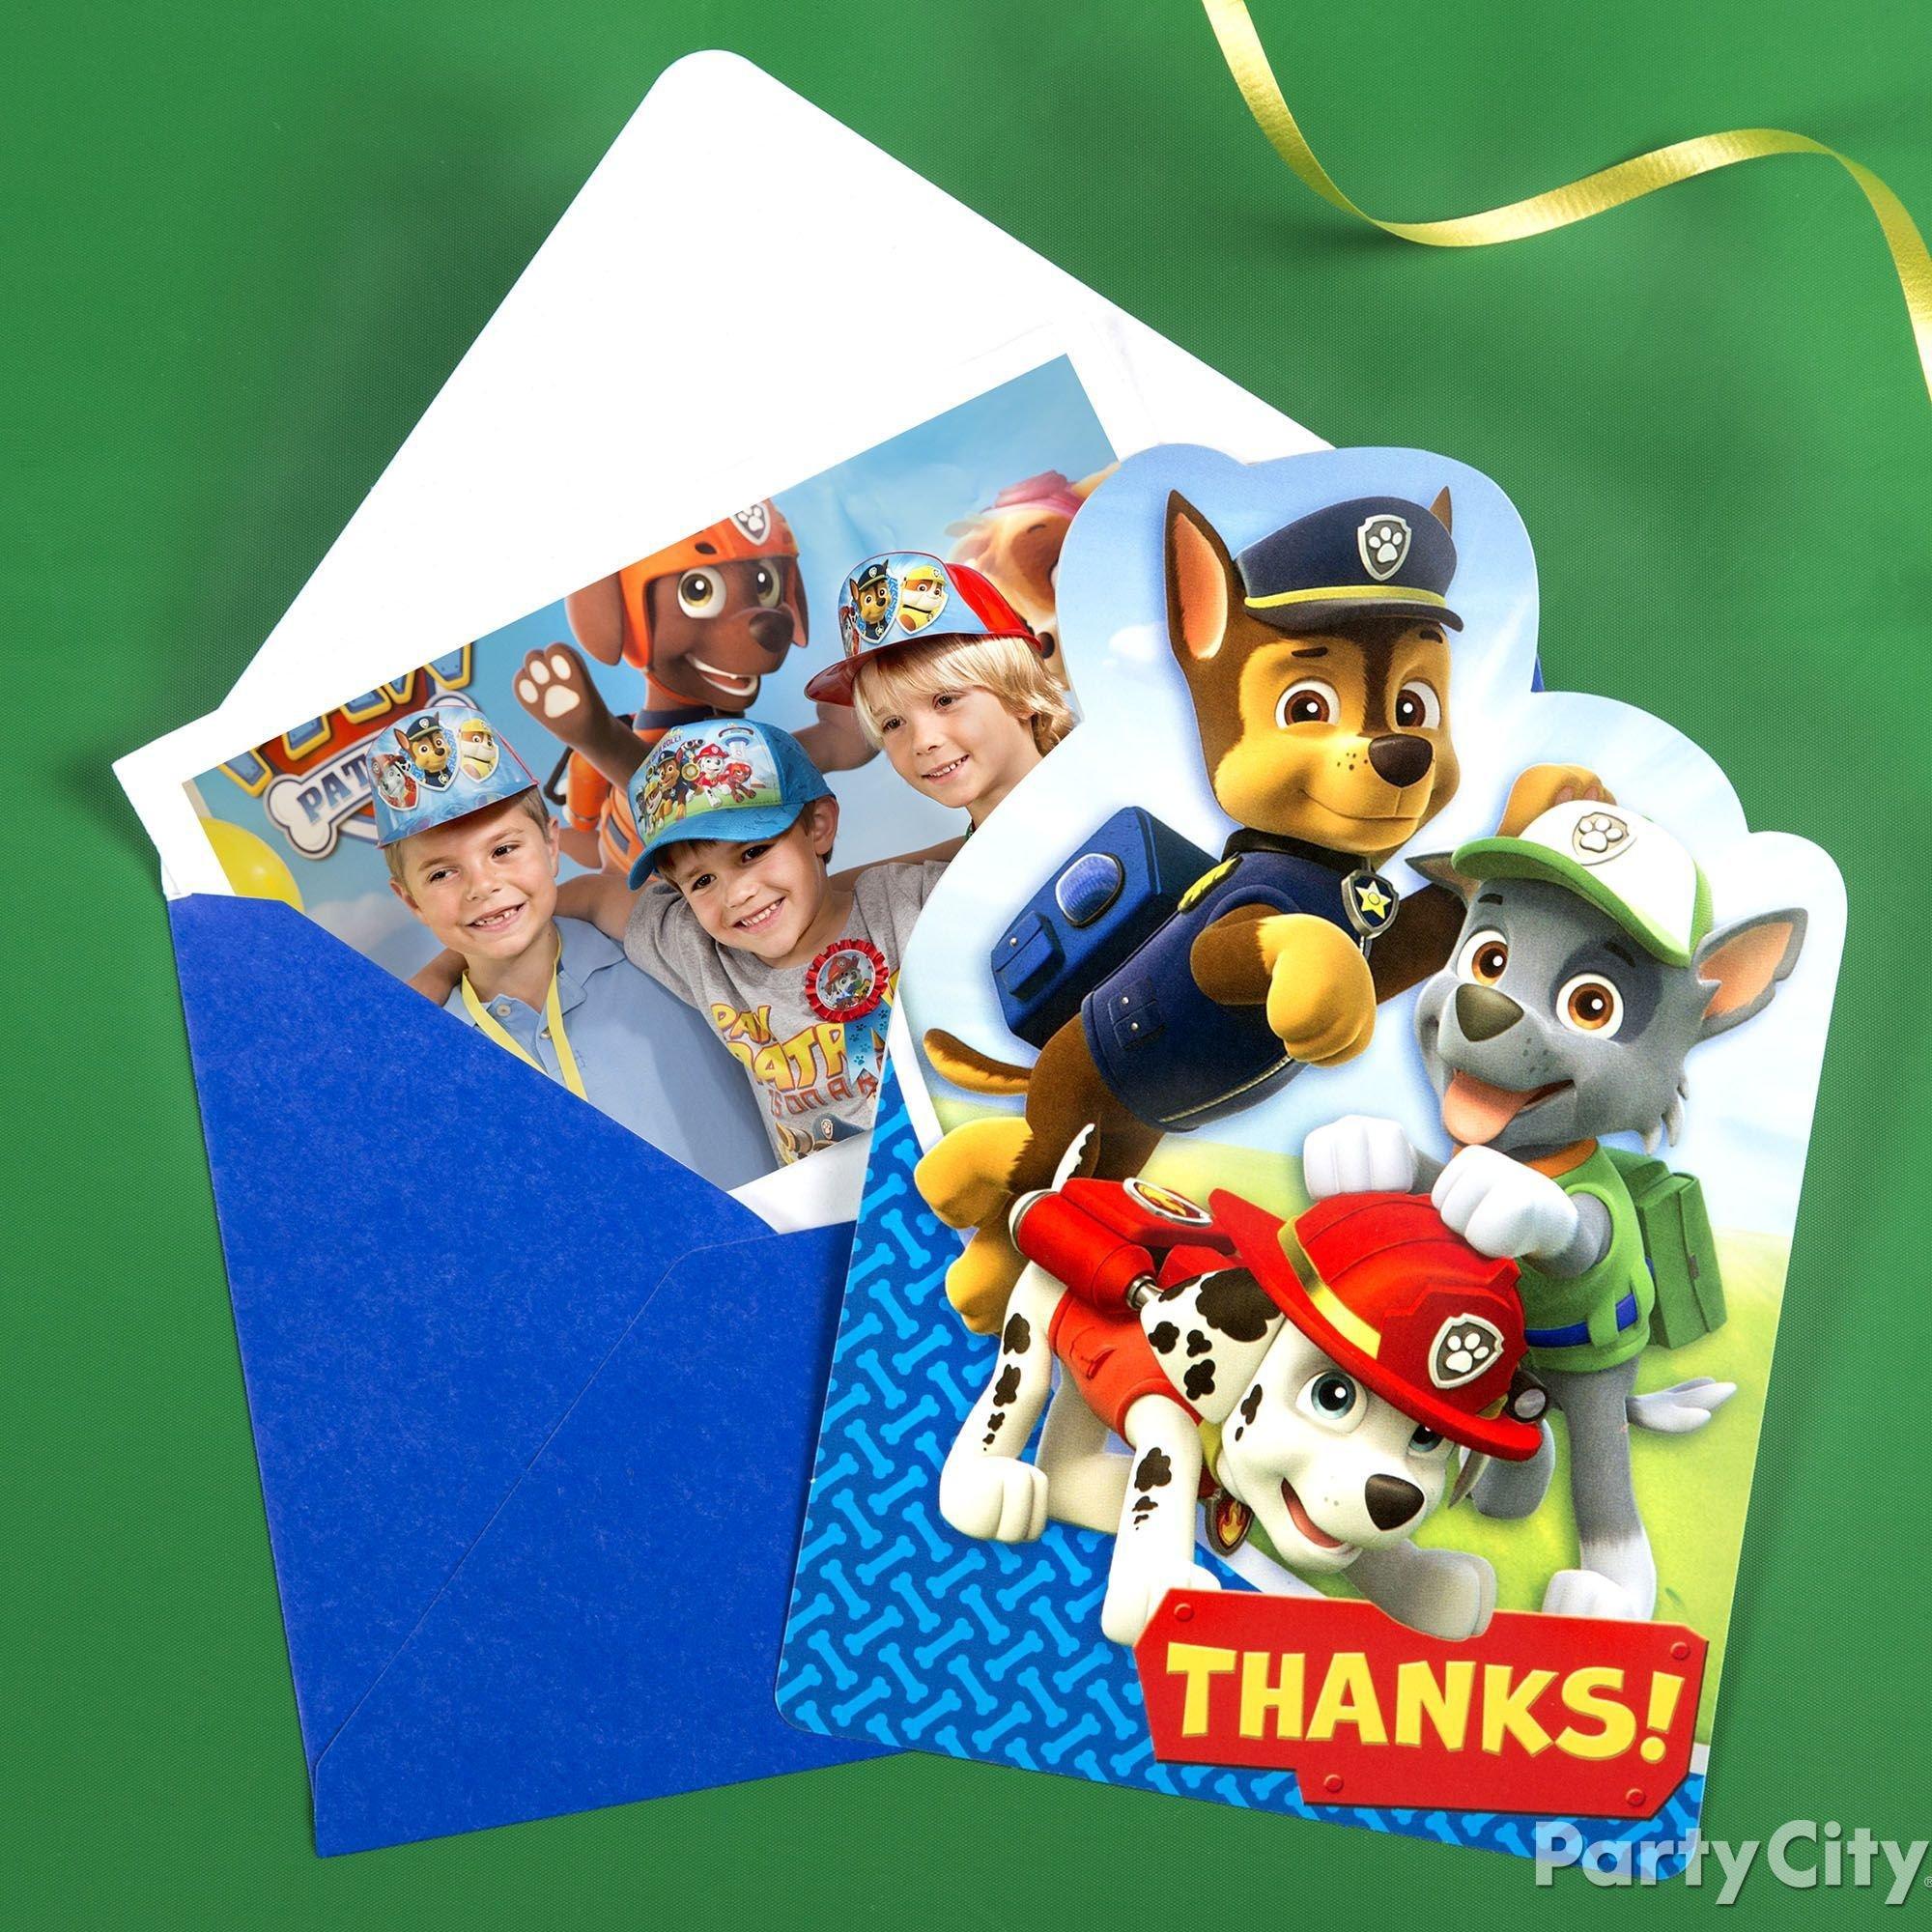 PAW Patrol thank you note